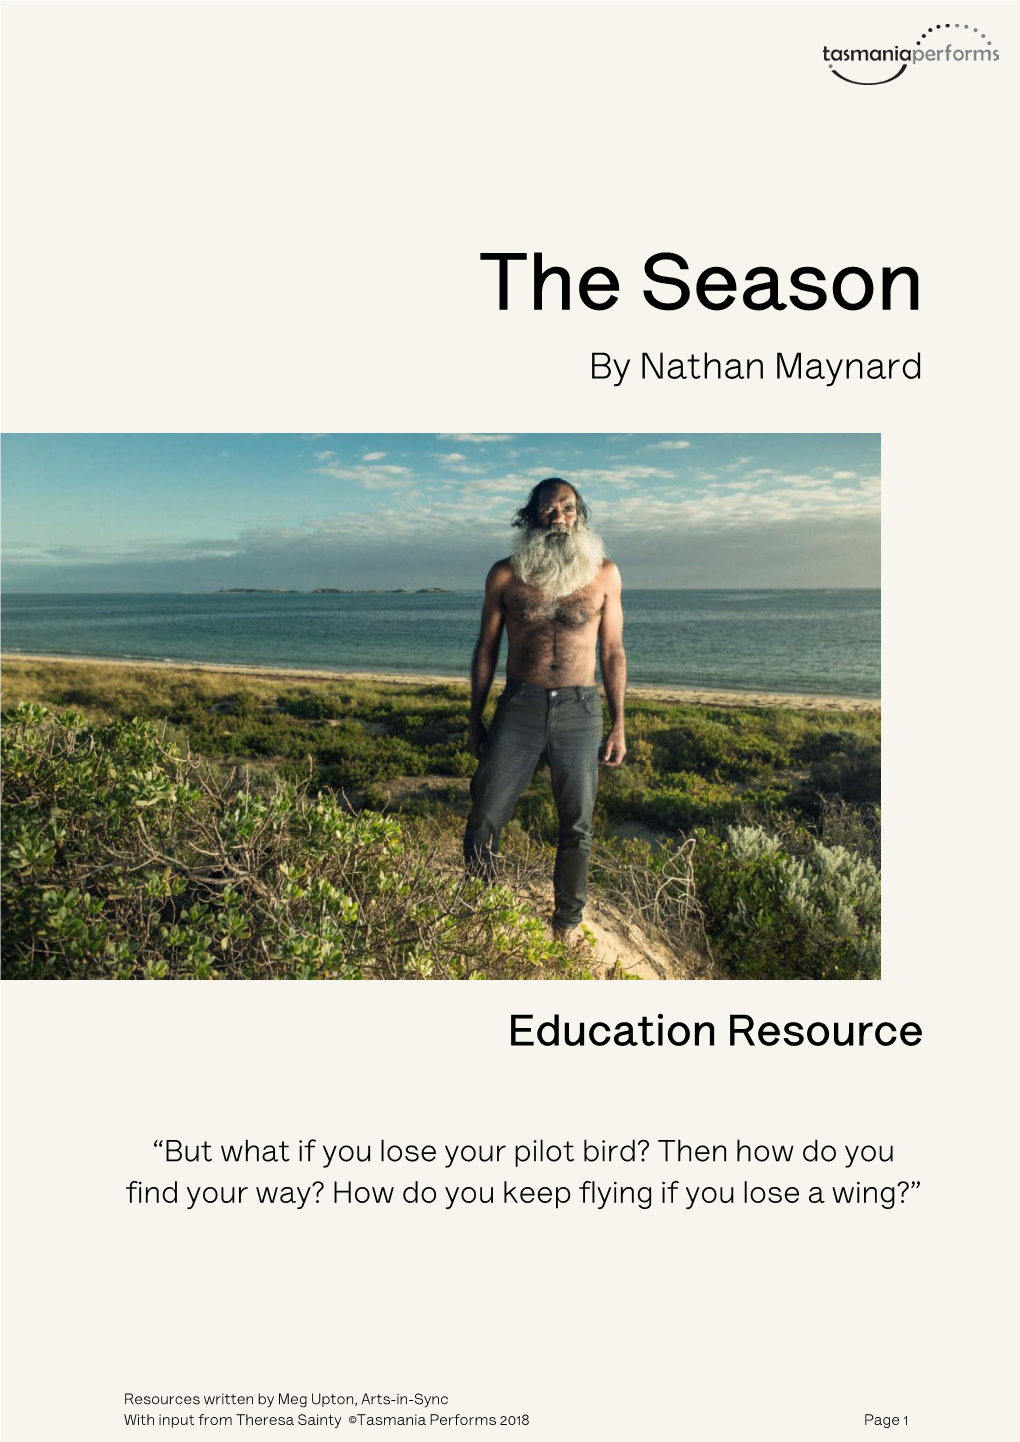 To Download the Season Education Notes